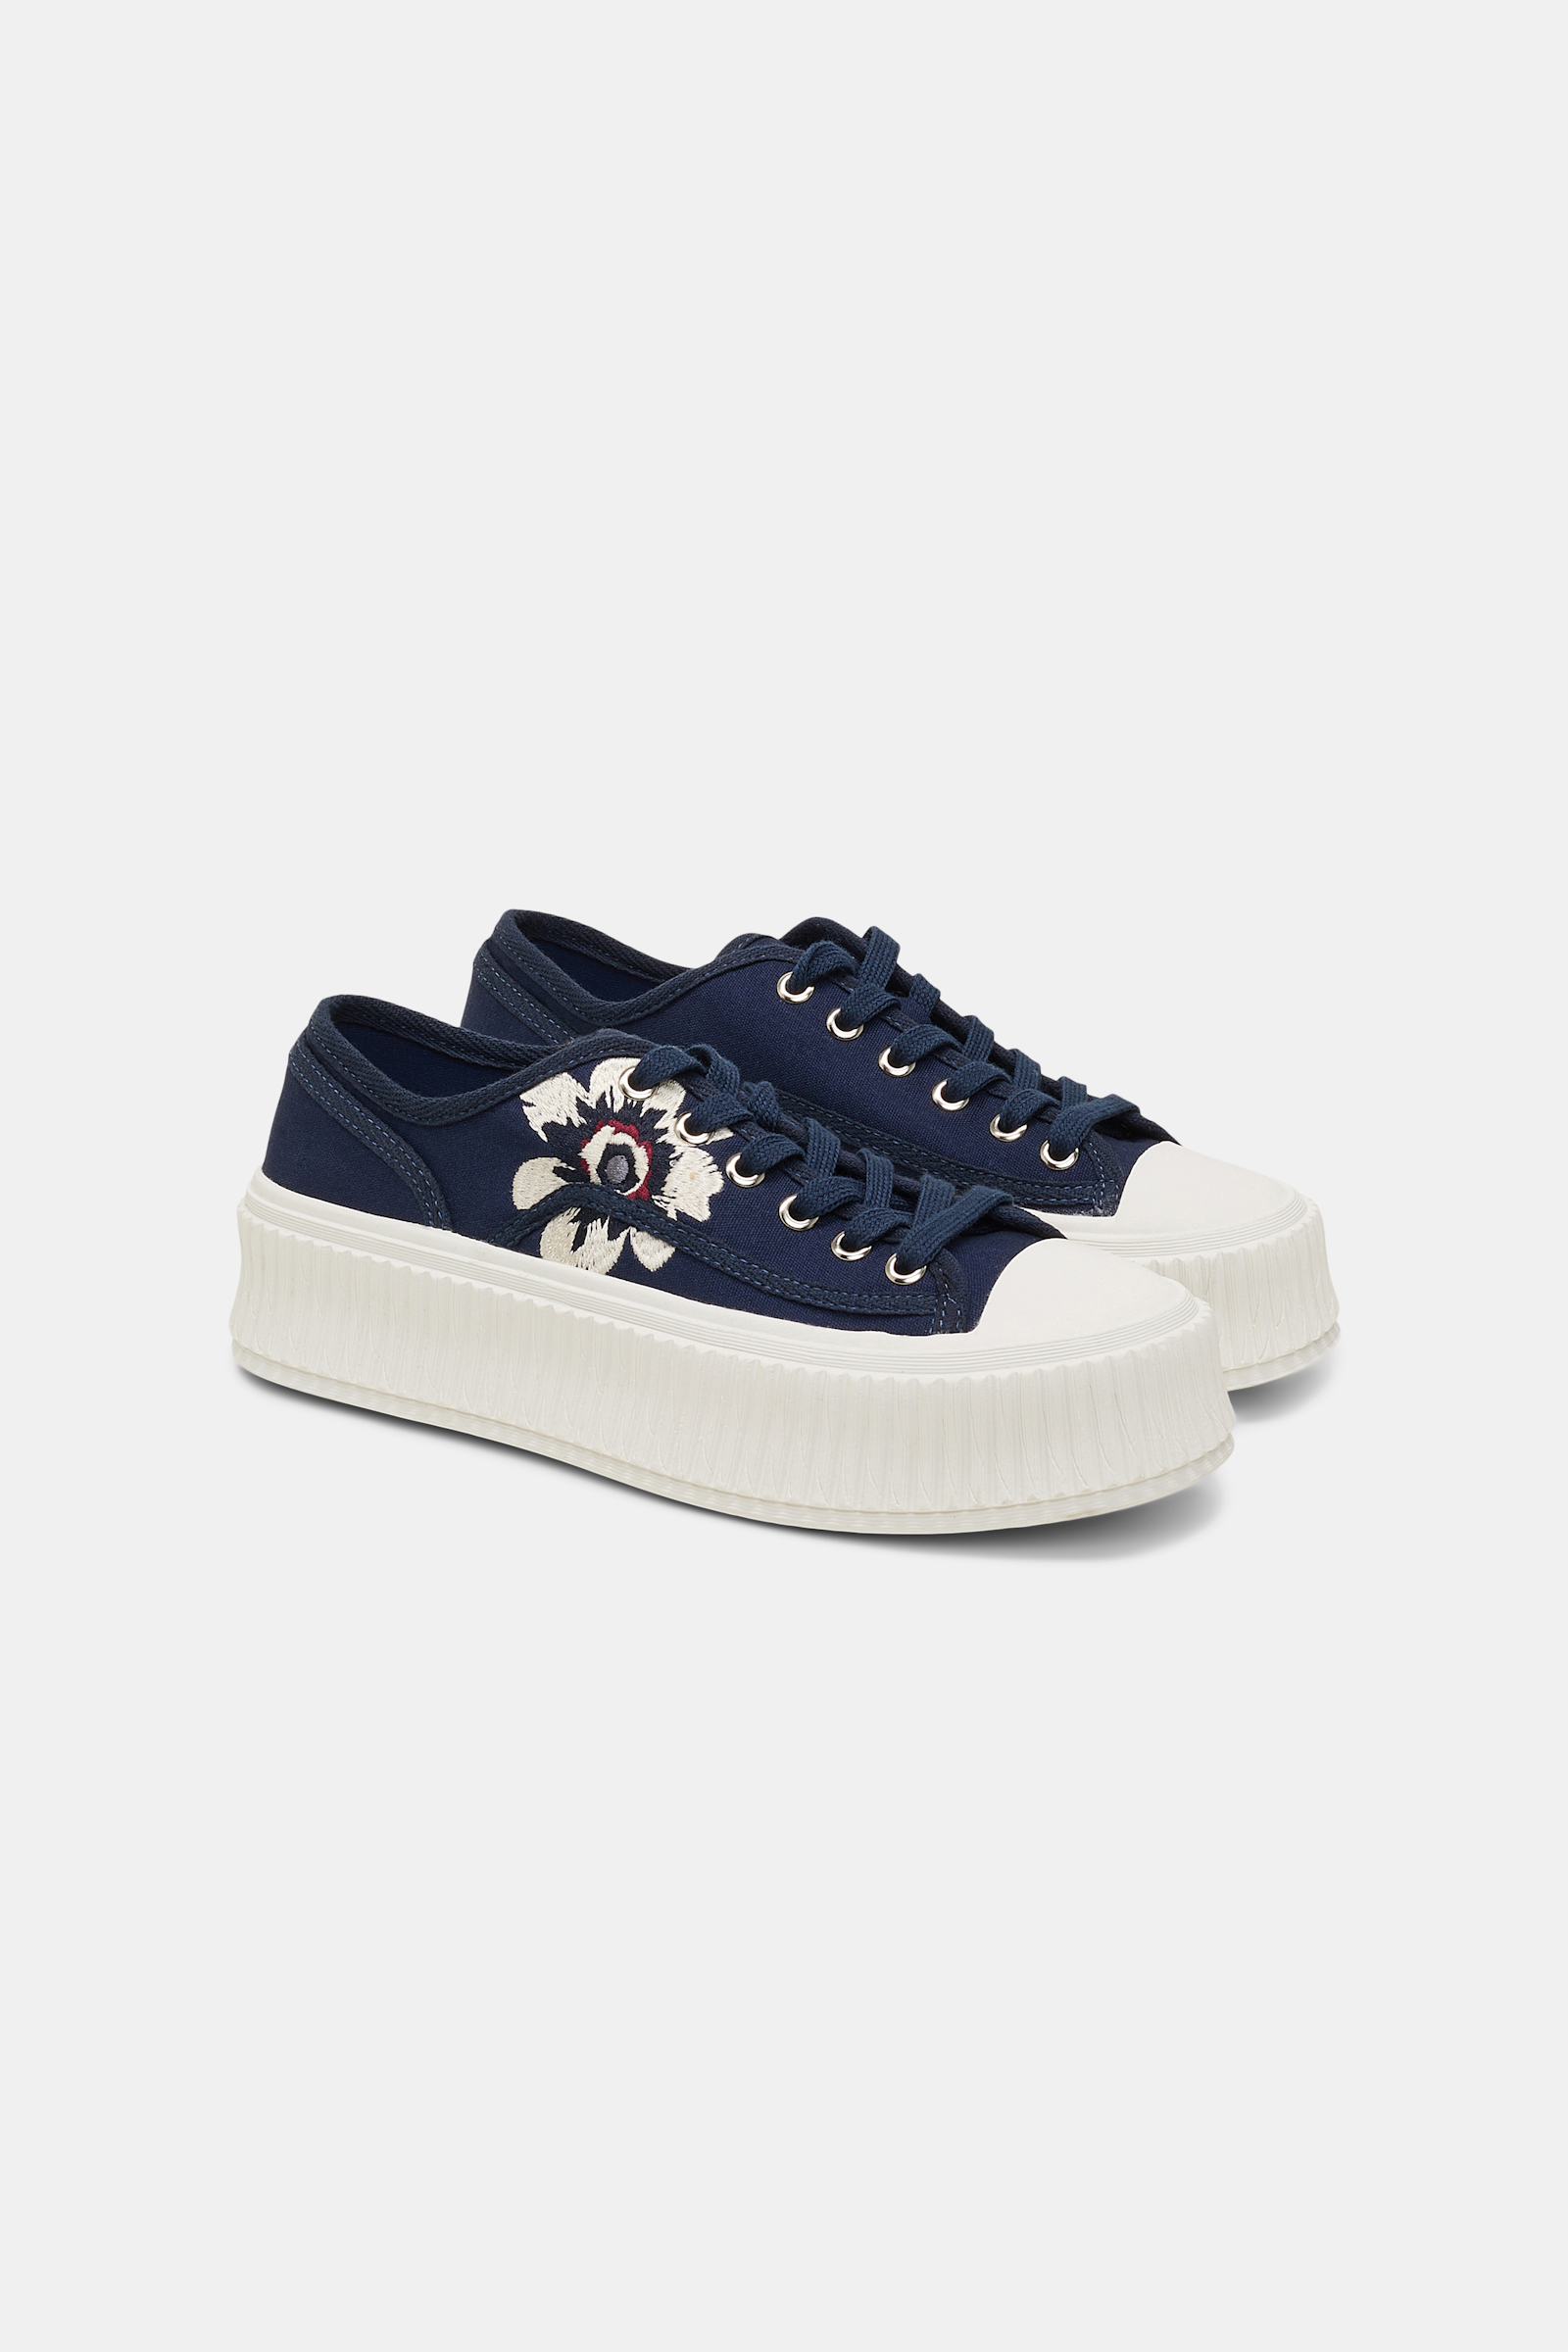 Dorothee Schumacher Cotton canvas platform sneakers with flower embroidery dark navy with embroidery